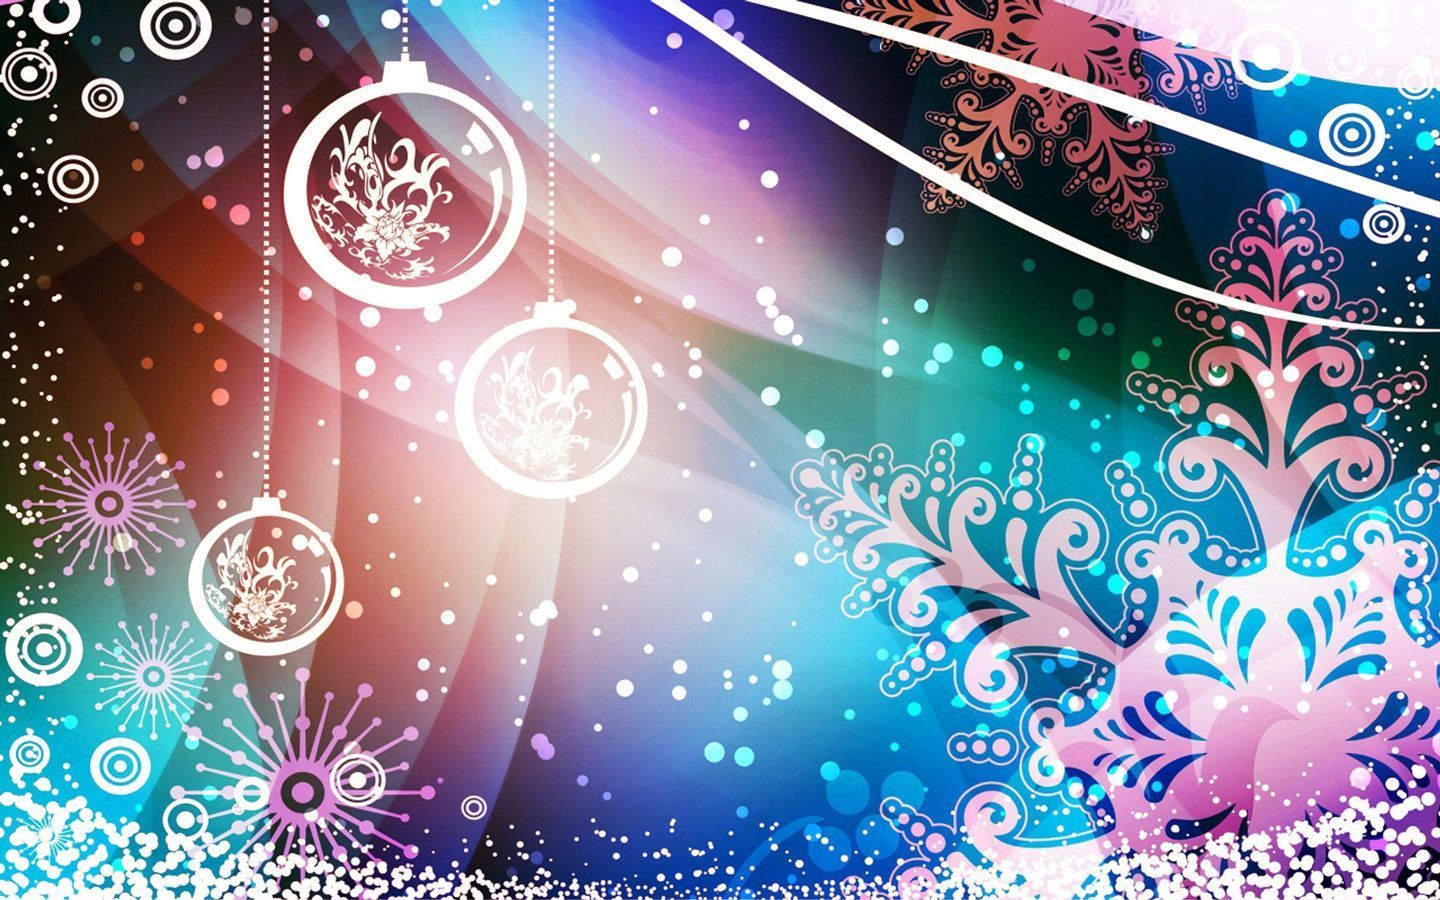 2015 Christmas computer wallpaper - images, pics, photos, pictures ...